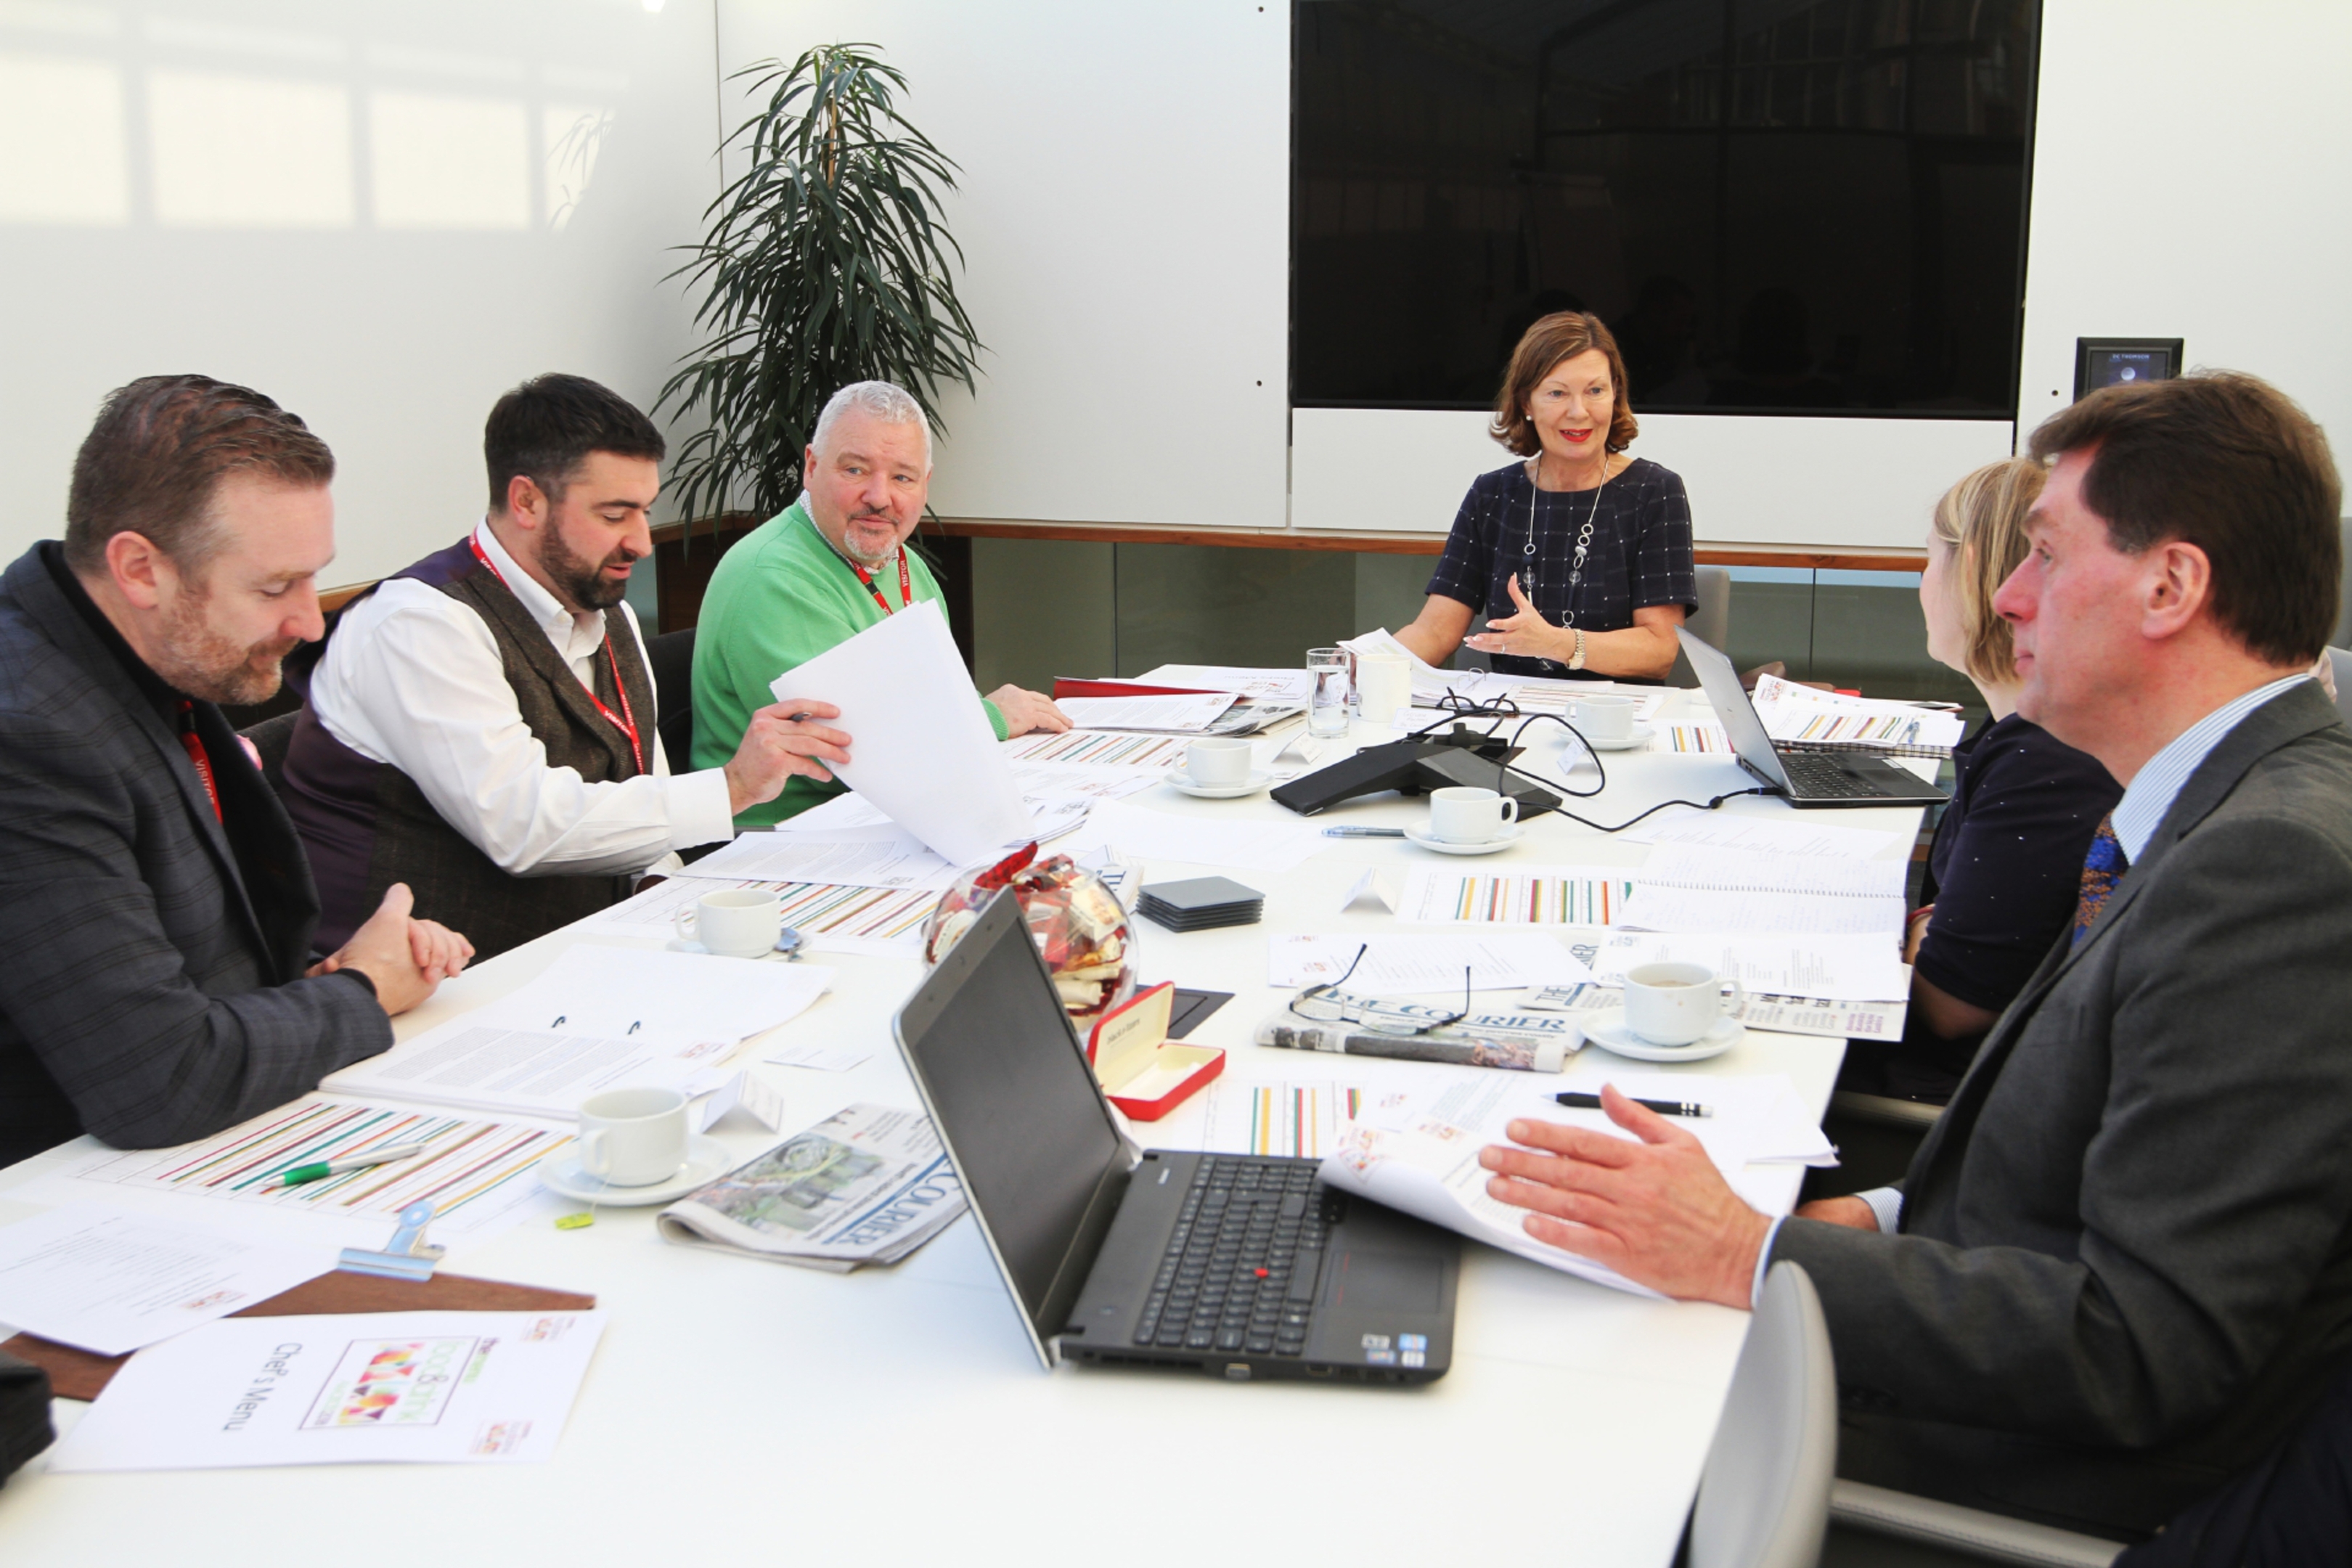 The judges meet to discuss the entries for the awards.